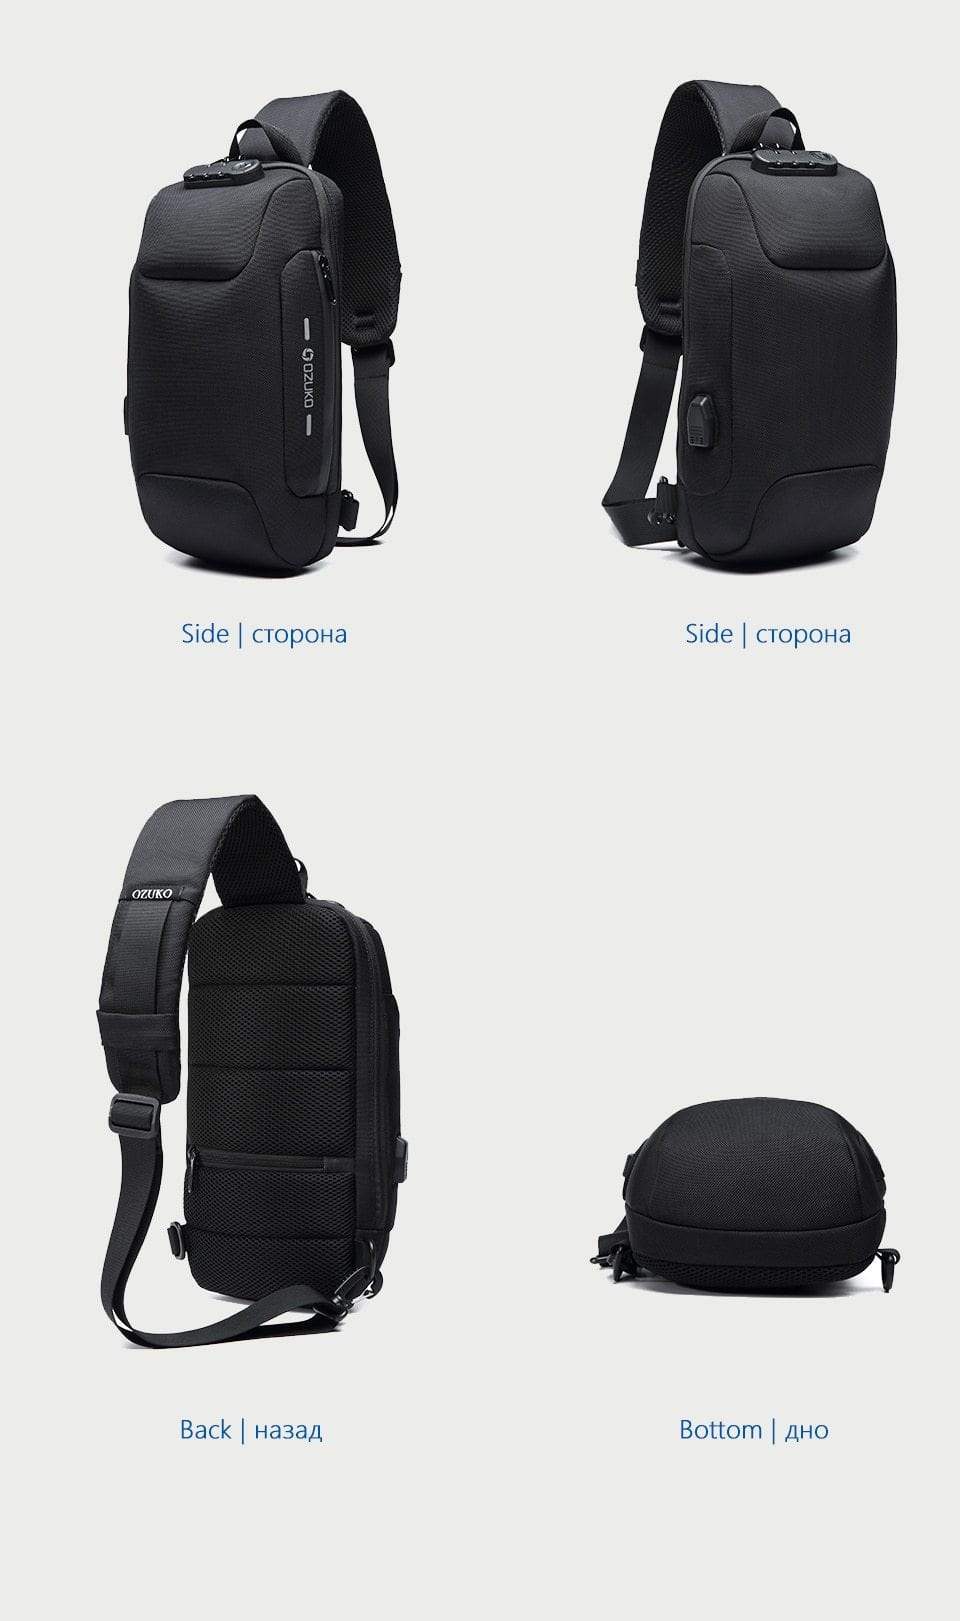 Anti-theft Waterproof Crossbody Backpack - More than a backpack